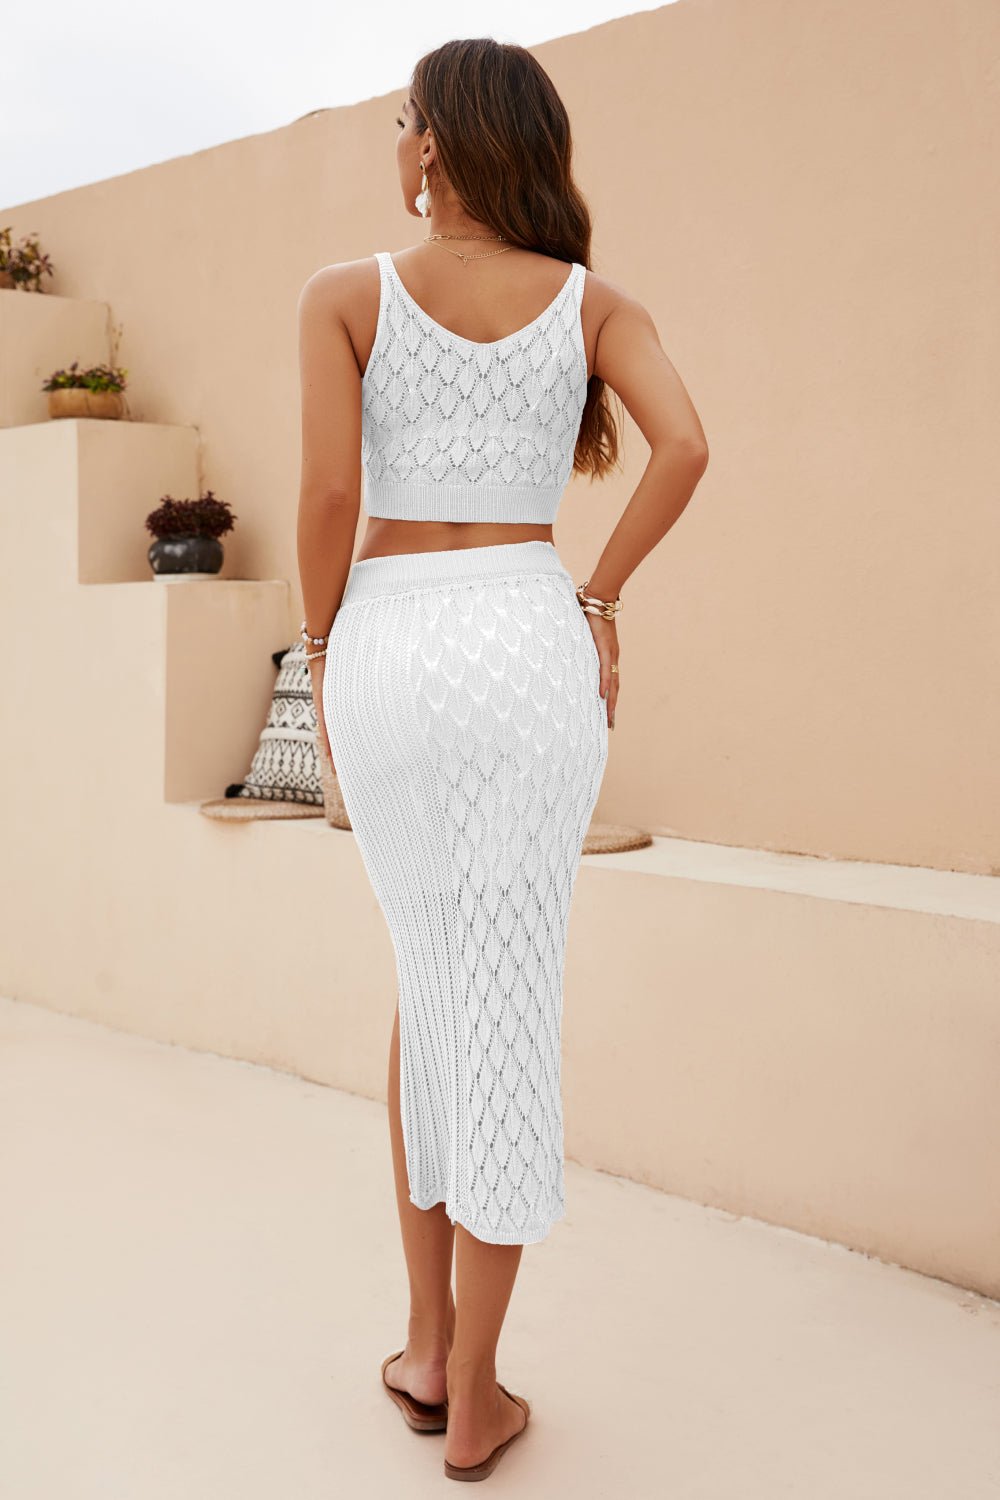 Openwork Cropped Tank and Split Skirt Set - Fashion Girl Online Store